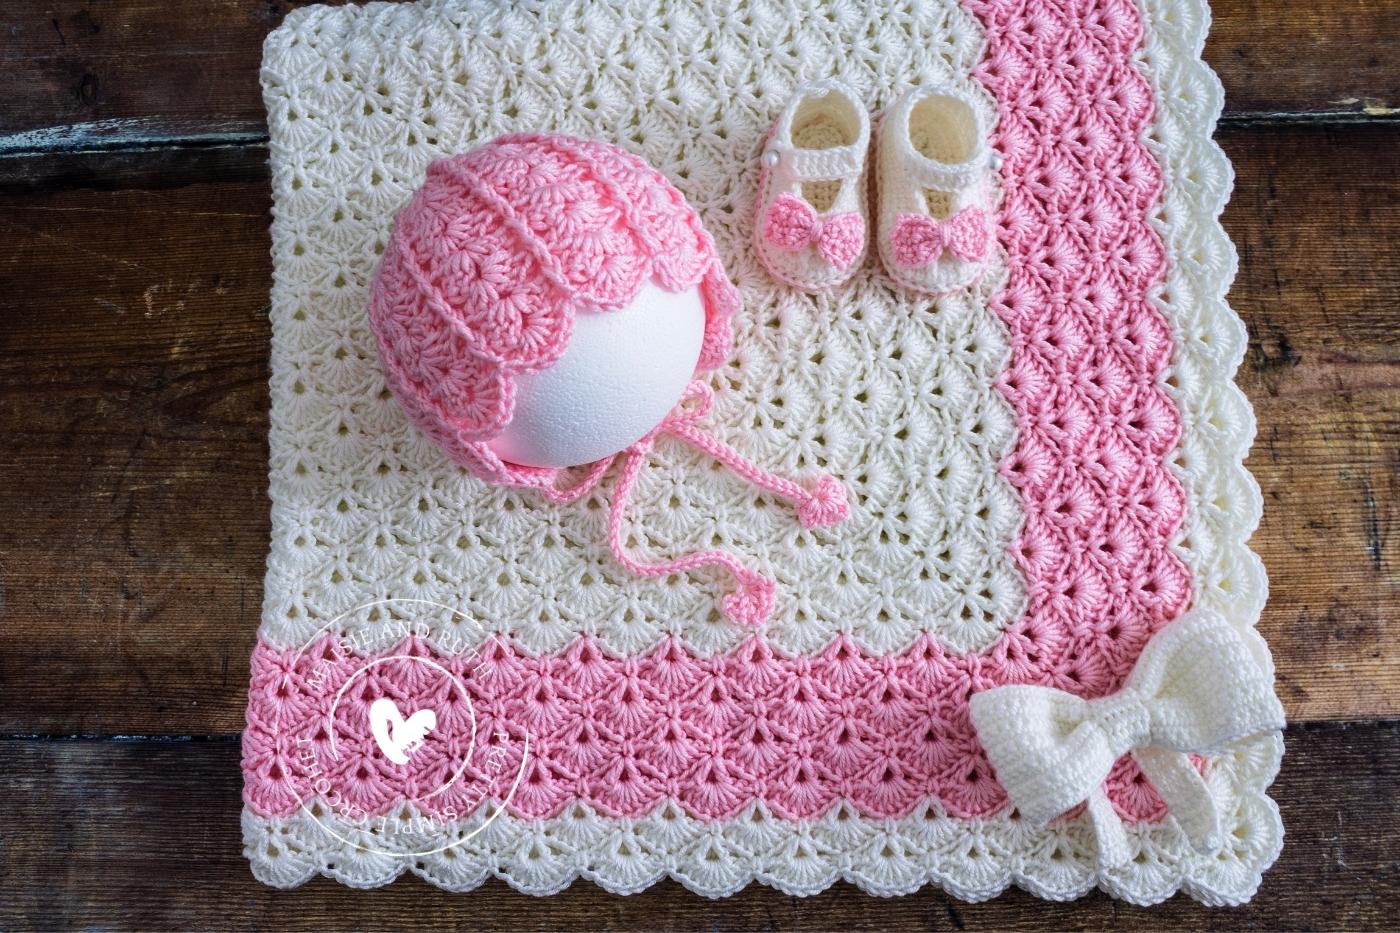 crochet baby blanket in the round with bonnet and shoes